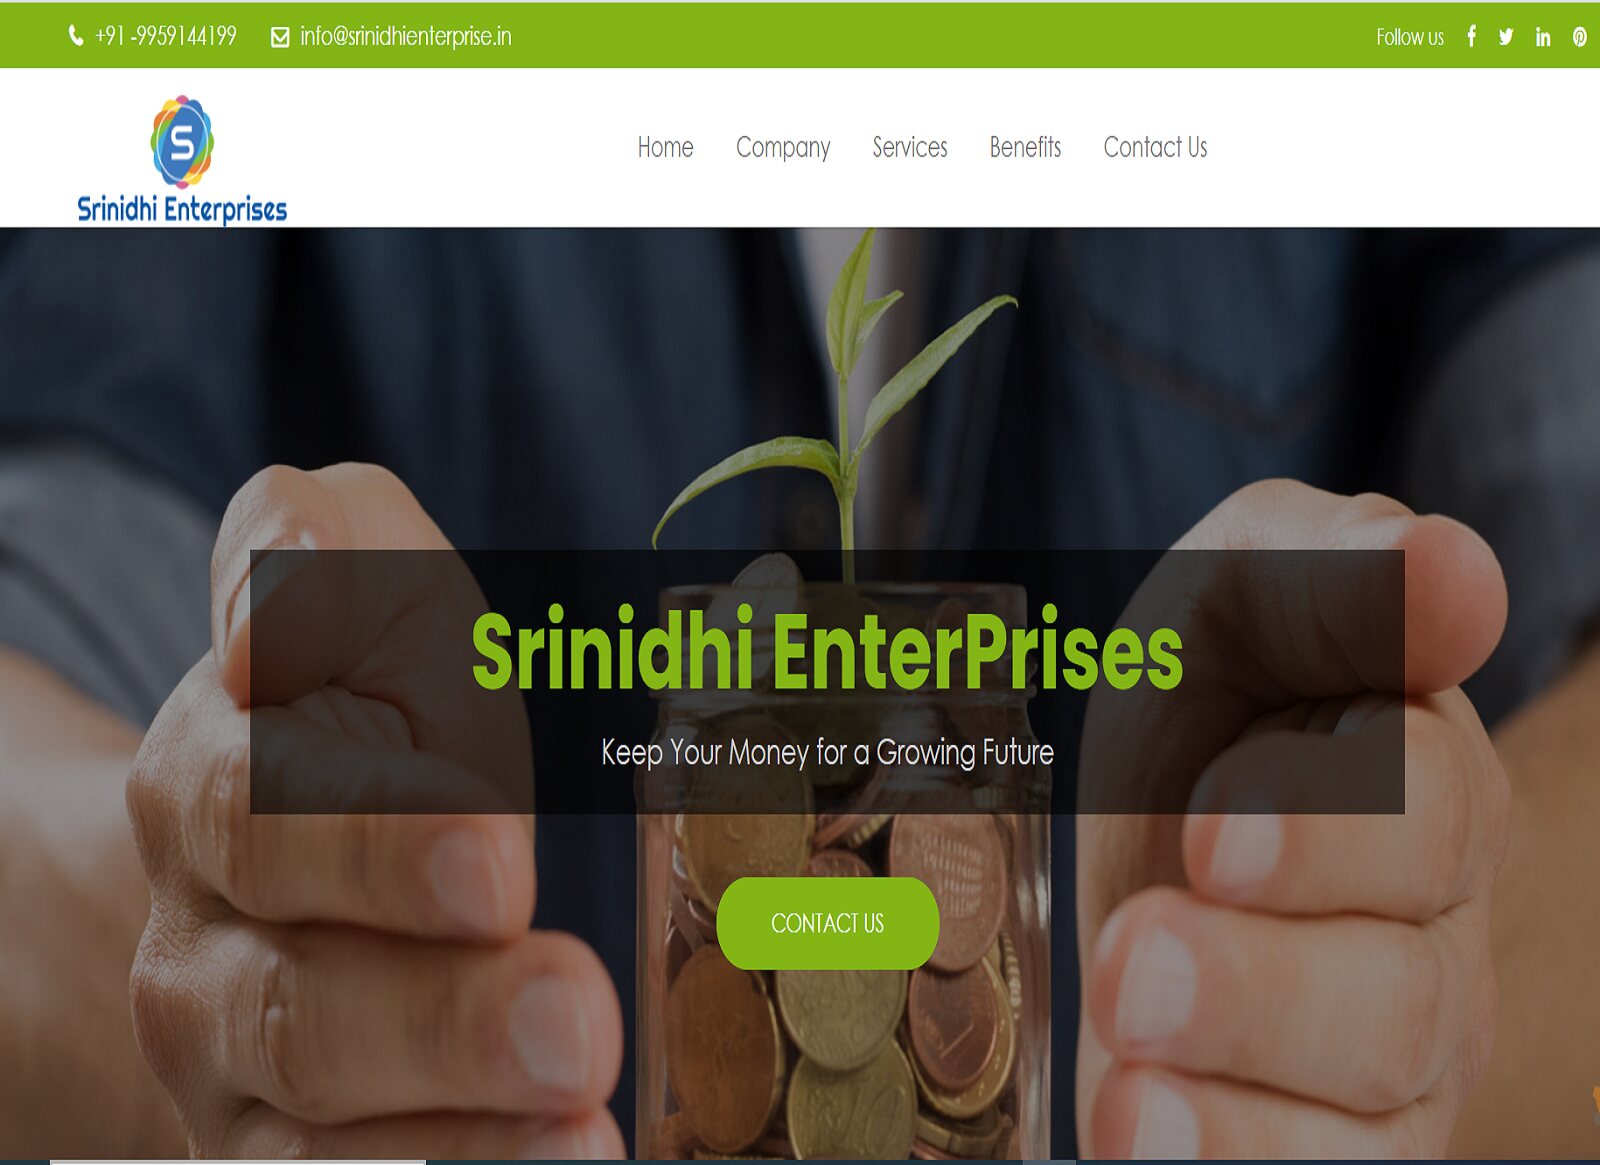 Our-work-Srinidhi-Enterprise-BSIT_Software_Services_Web_And_App_Development_Company_India